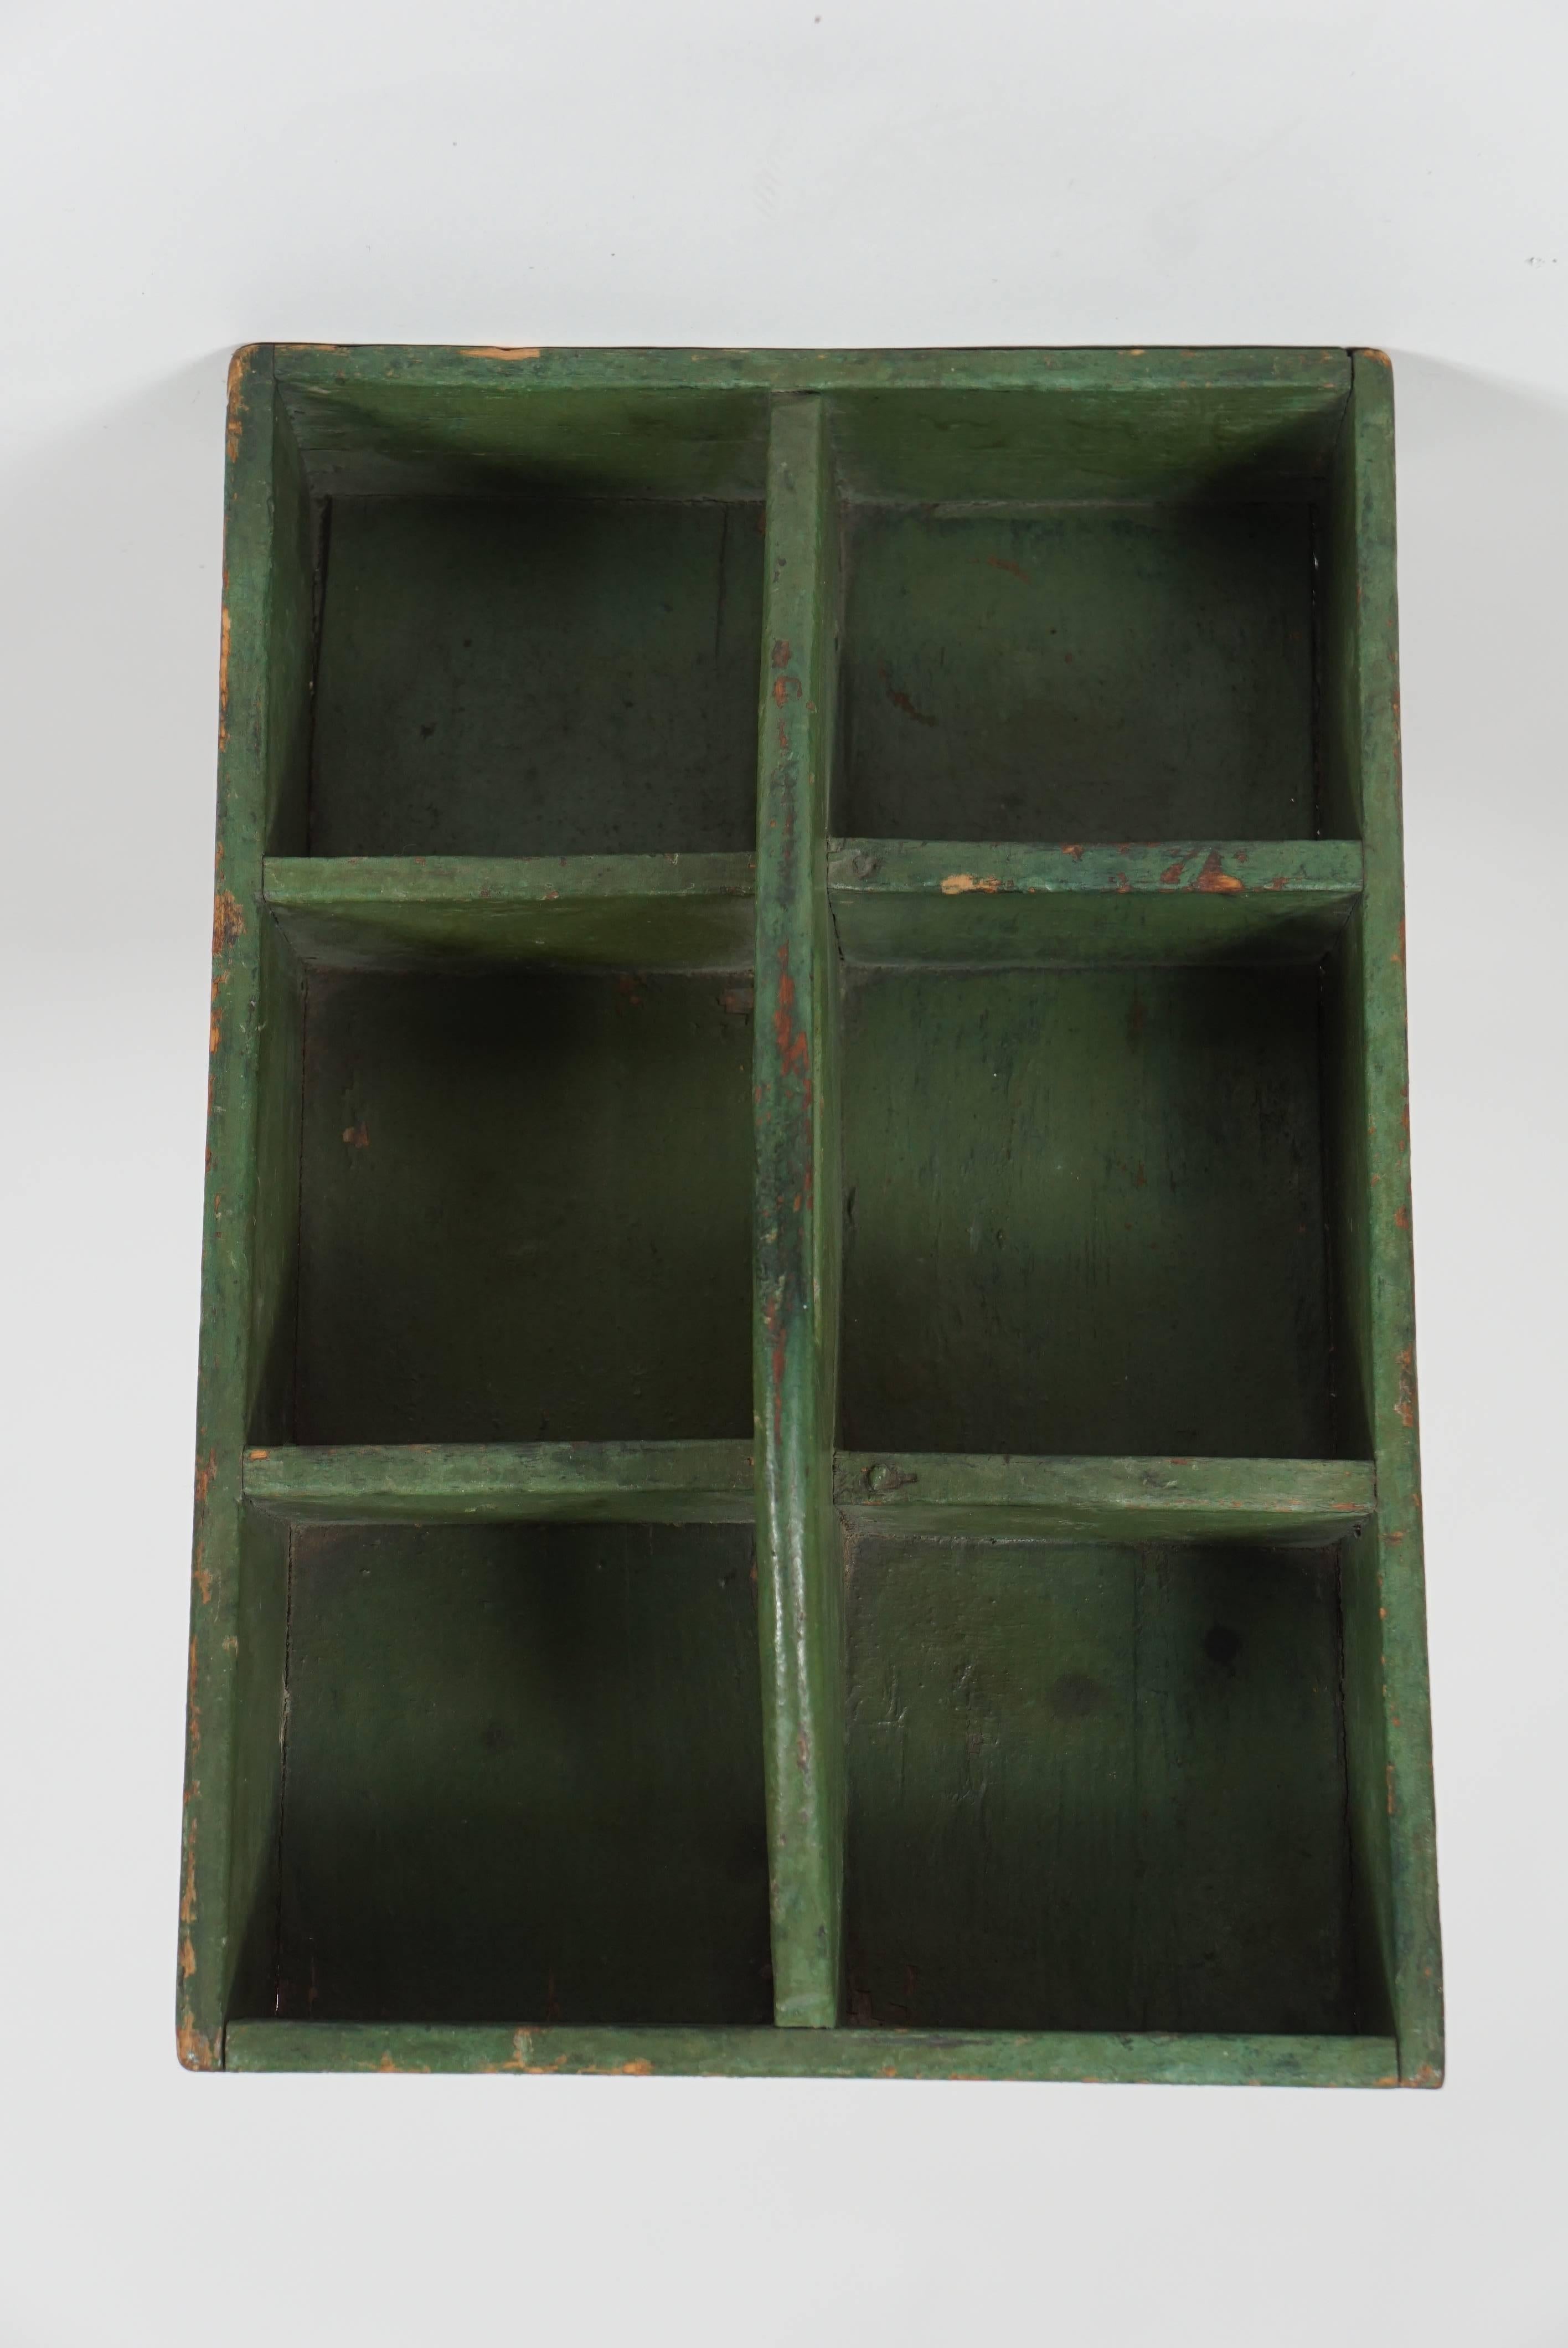 Small green hanging shelf, tool box. This is actually a tool box, but we loved
it as a hanging shelf and it has hooks for hanging it on the reverse side. American. Lovely for small objects, or keep your jewels in it.